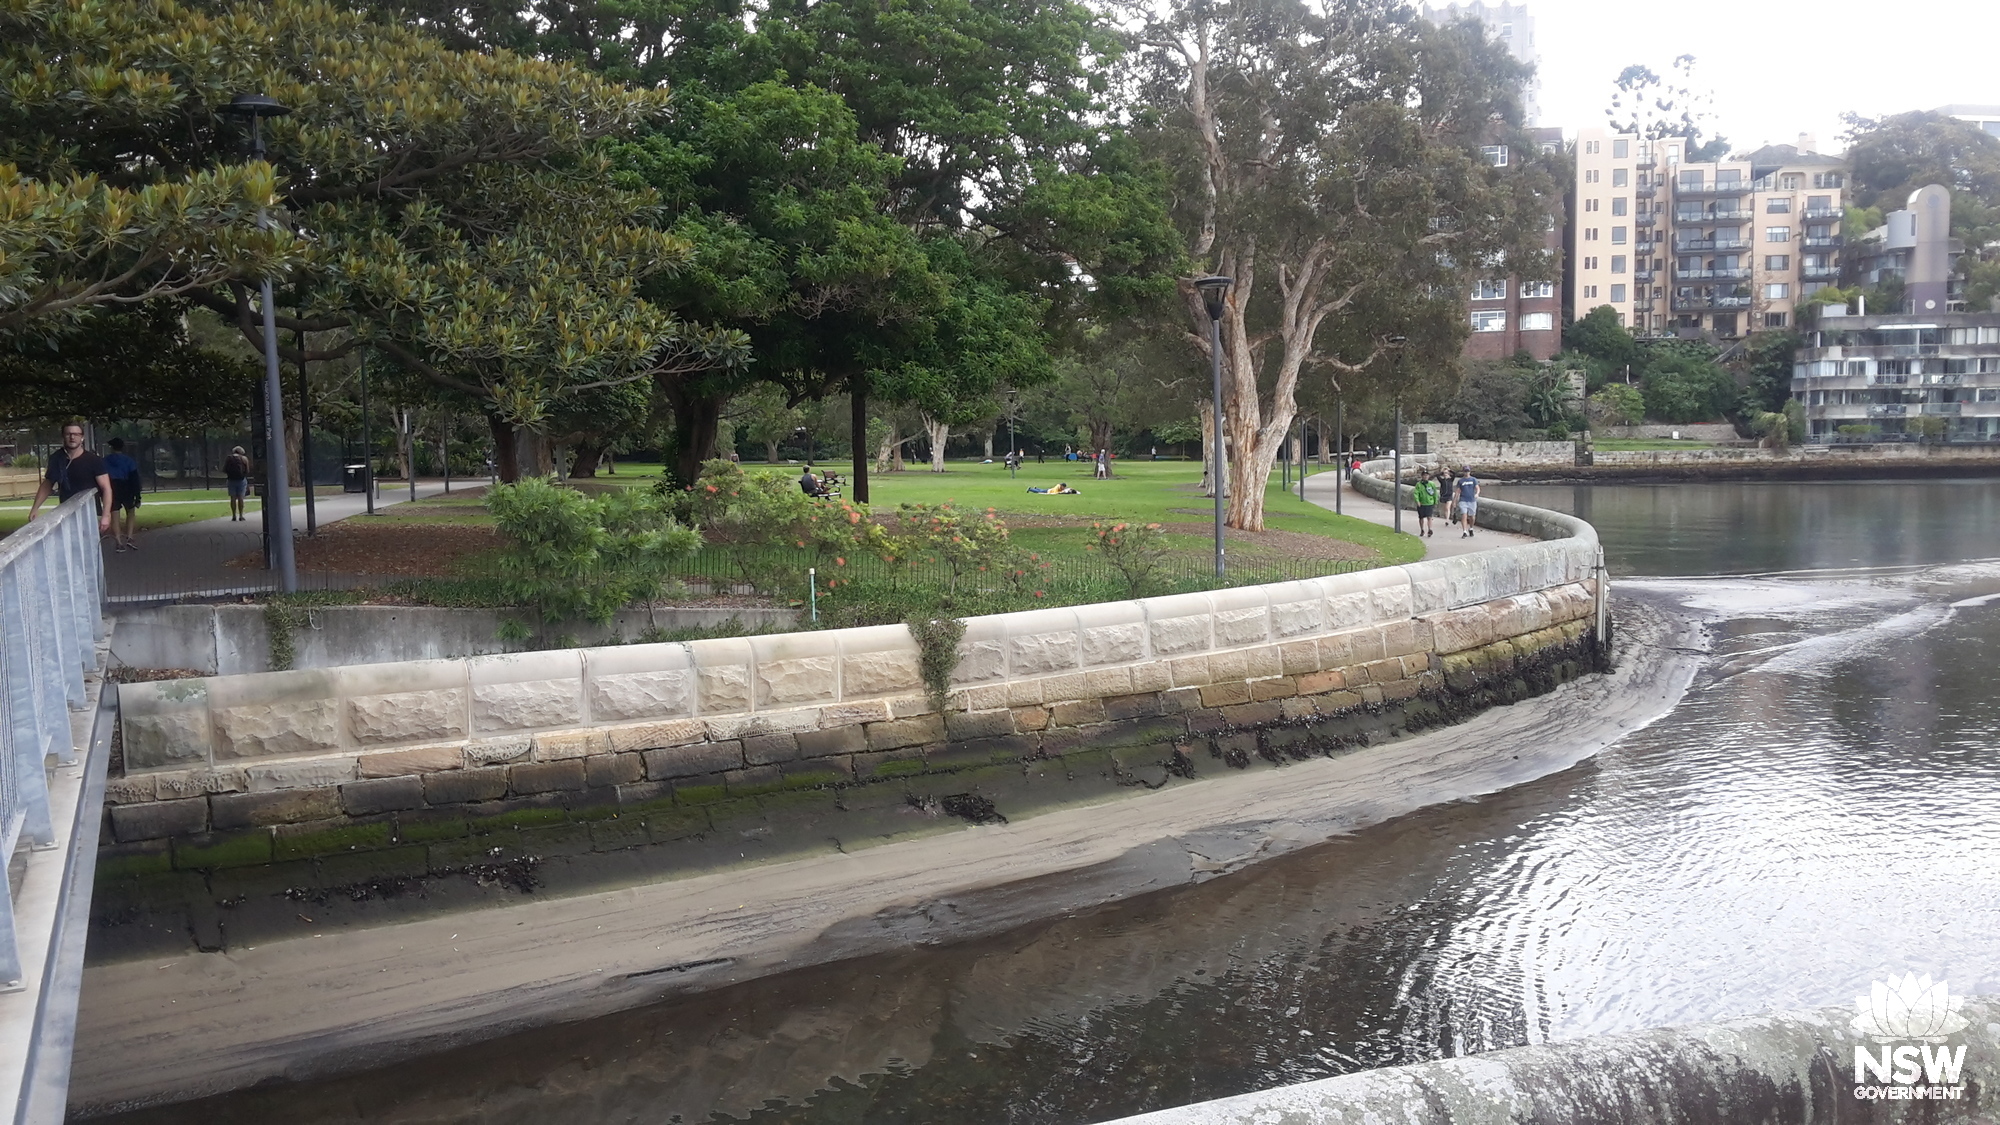 2020 3 26_Rushcutters Bay Park west seawall and parkland_Stuart Read